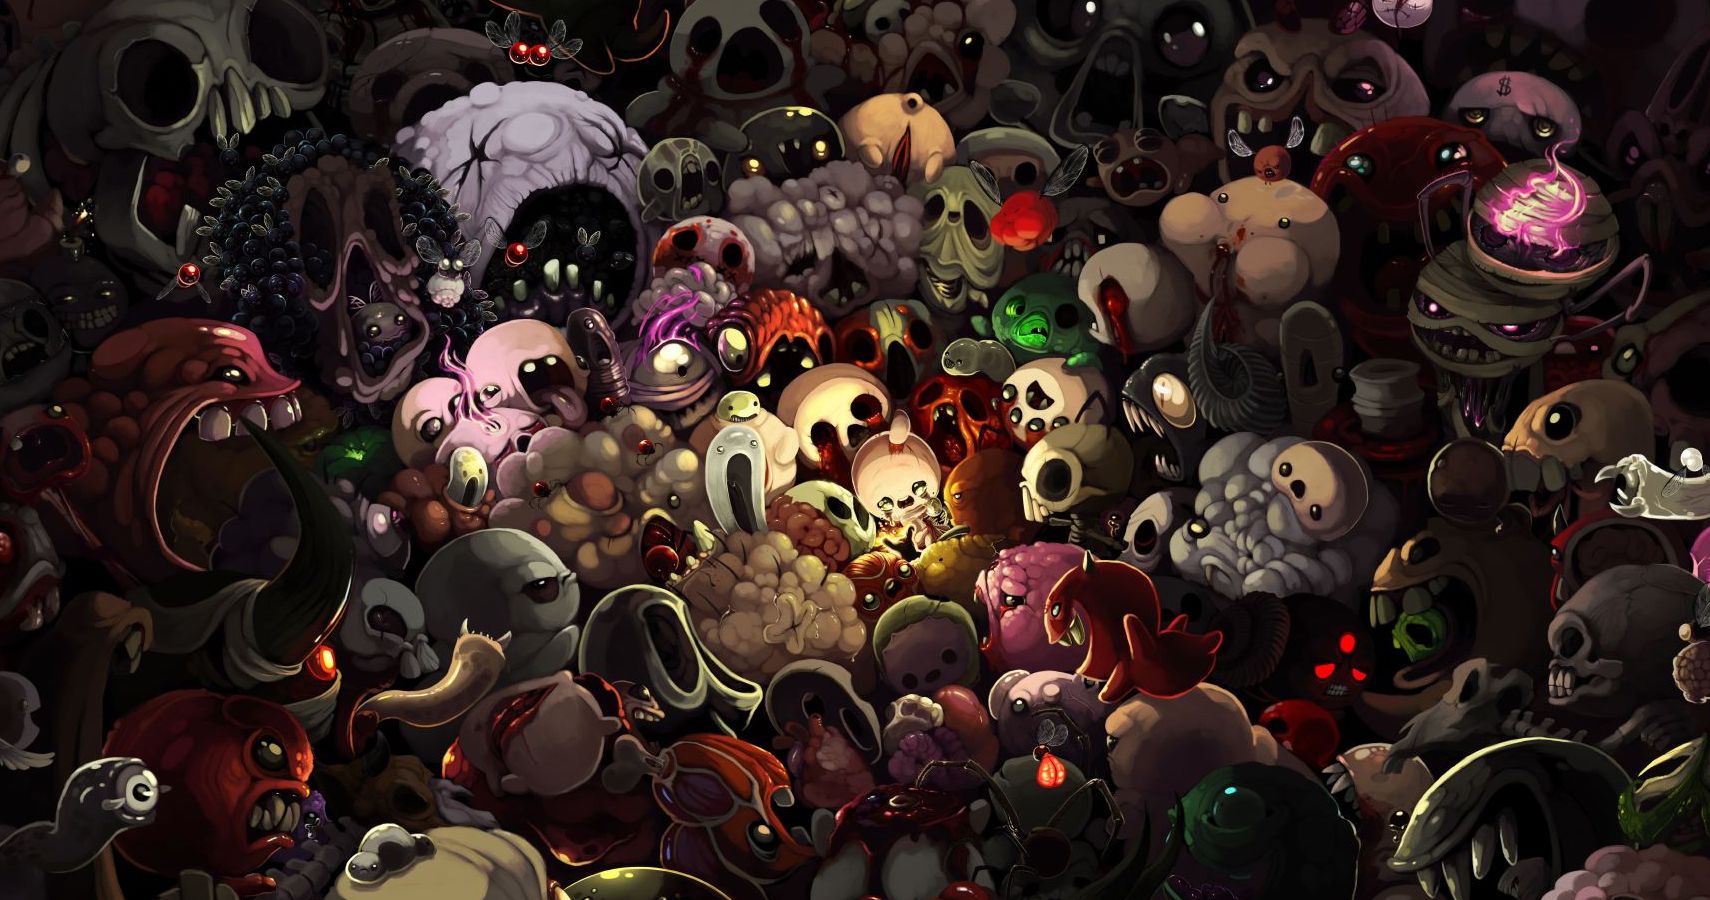 the binding of isaac repentance